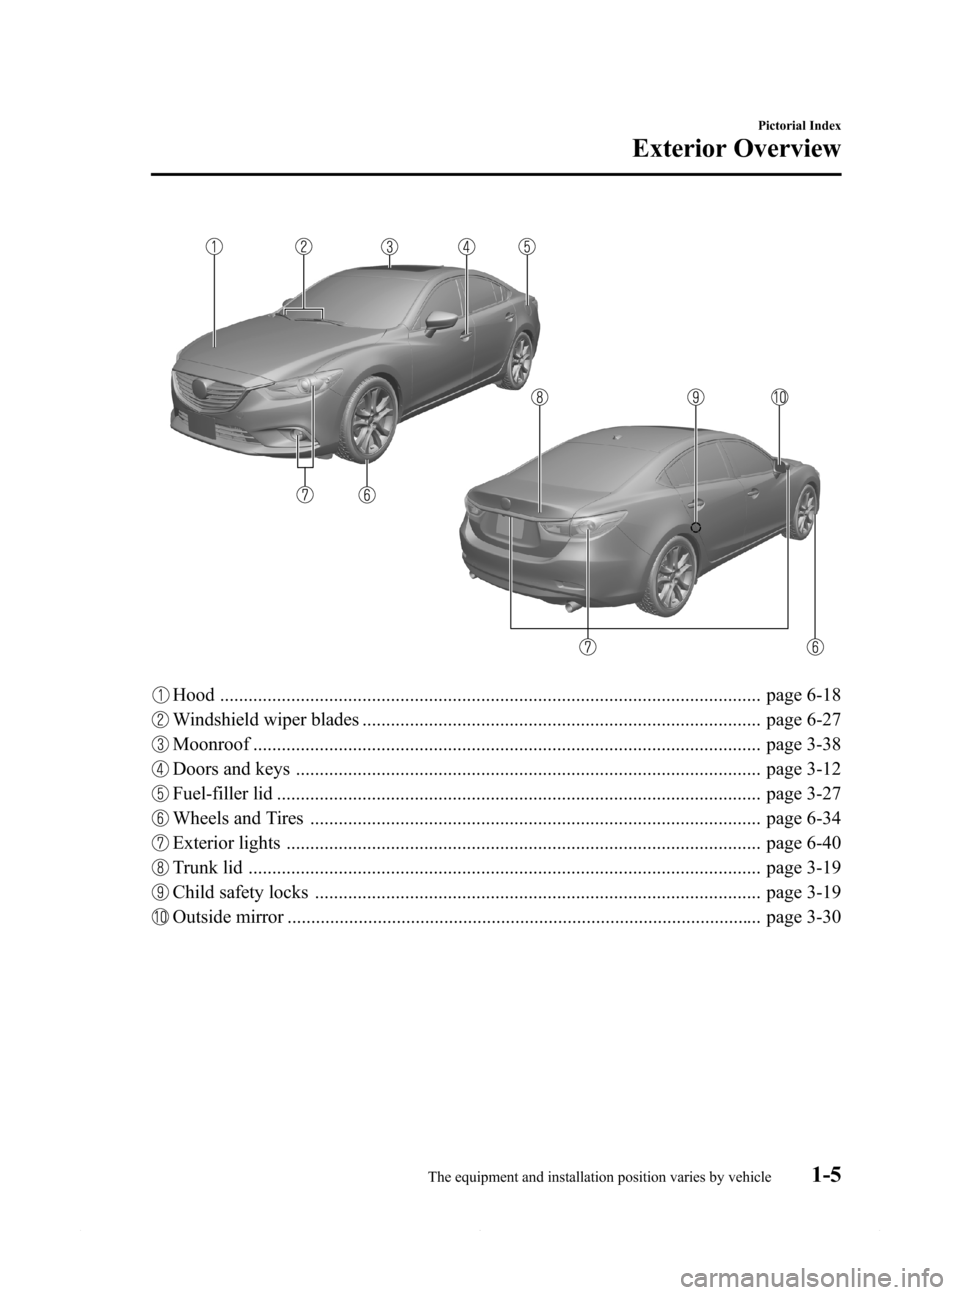 MAZDA MODEL 6 2015  Owners Manual (in English) Black plate (11,1)
Hood .................................................................................................................. page 6-18
Windshield wiper blades ...........................